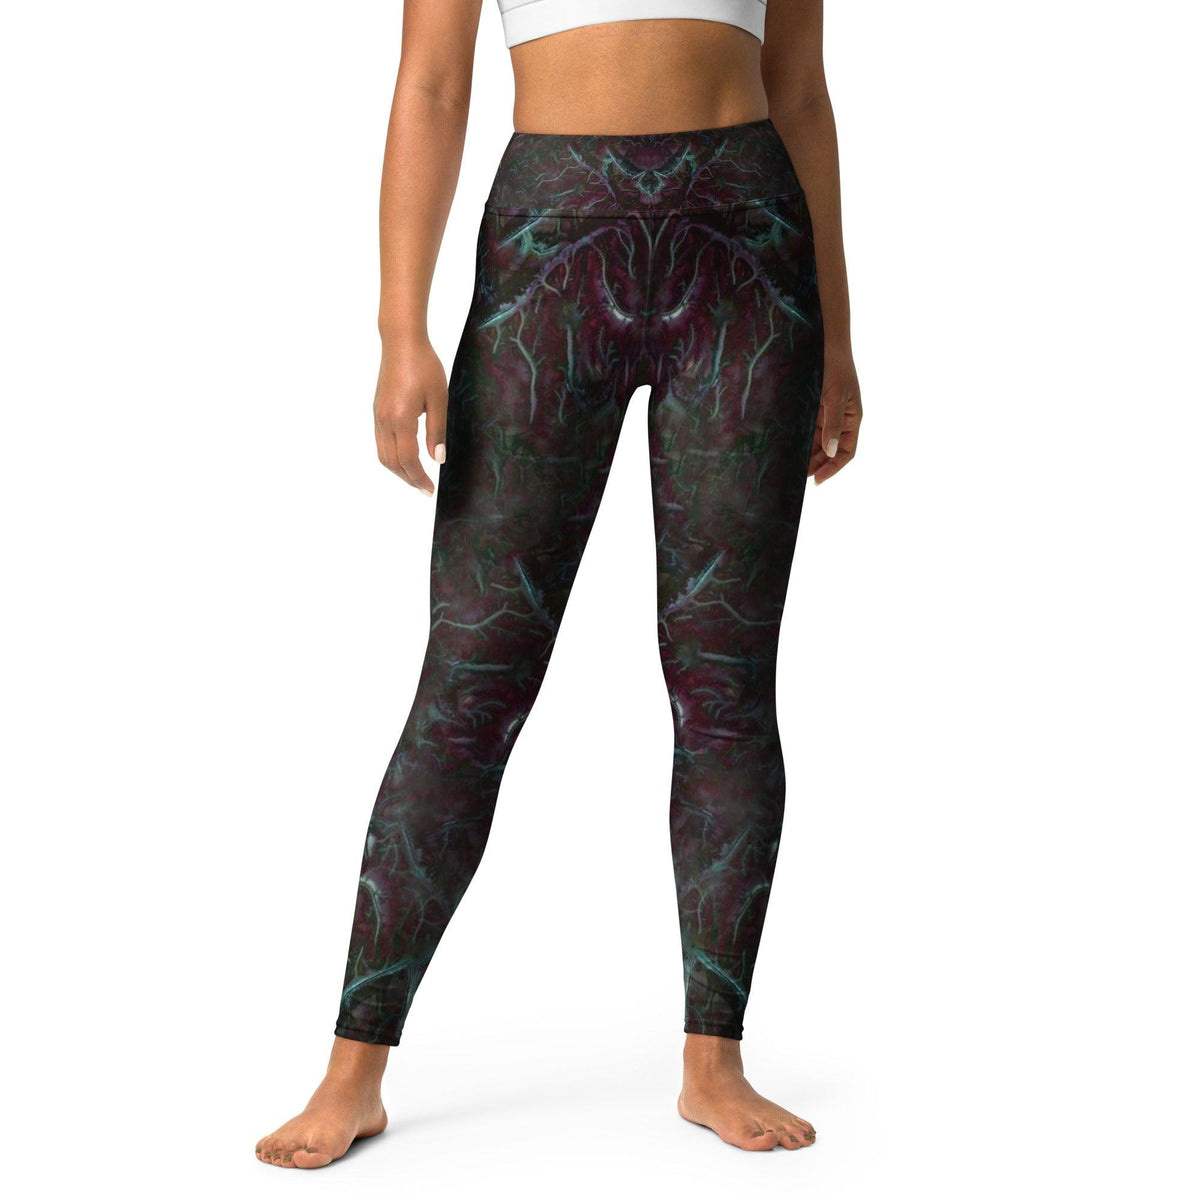 Roots 4 Yoga Leggings for supreme comfort and flexibility